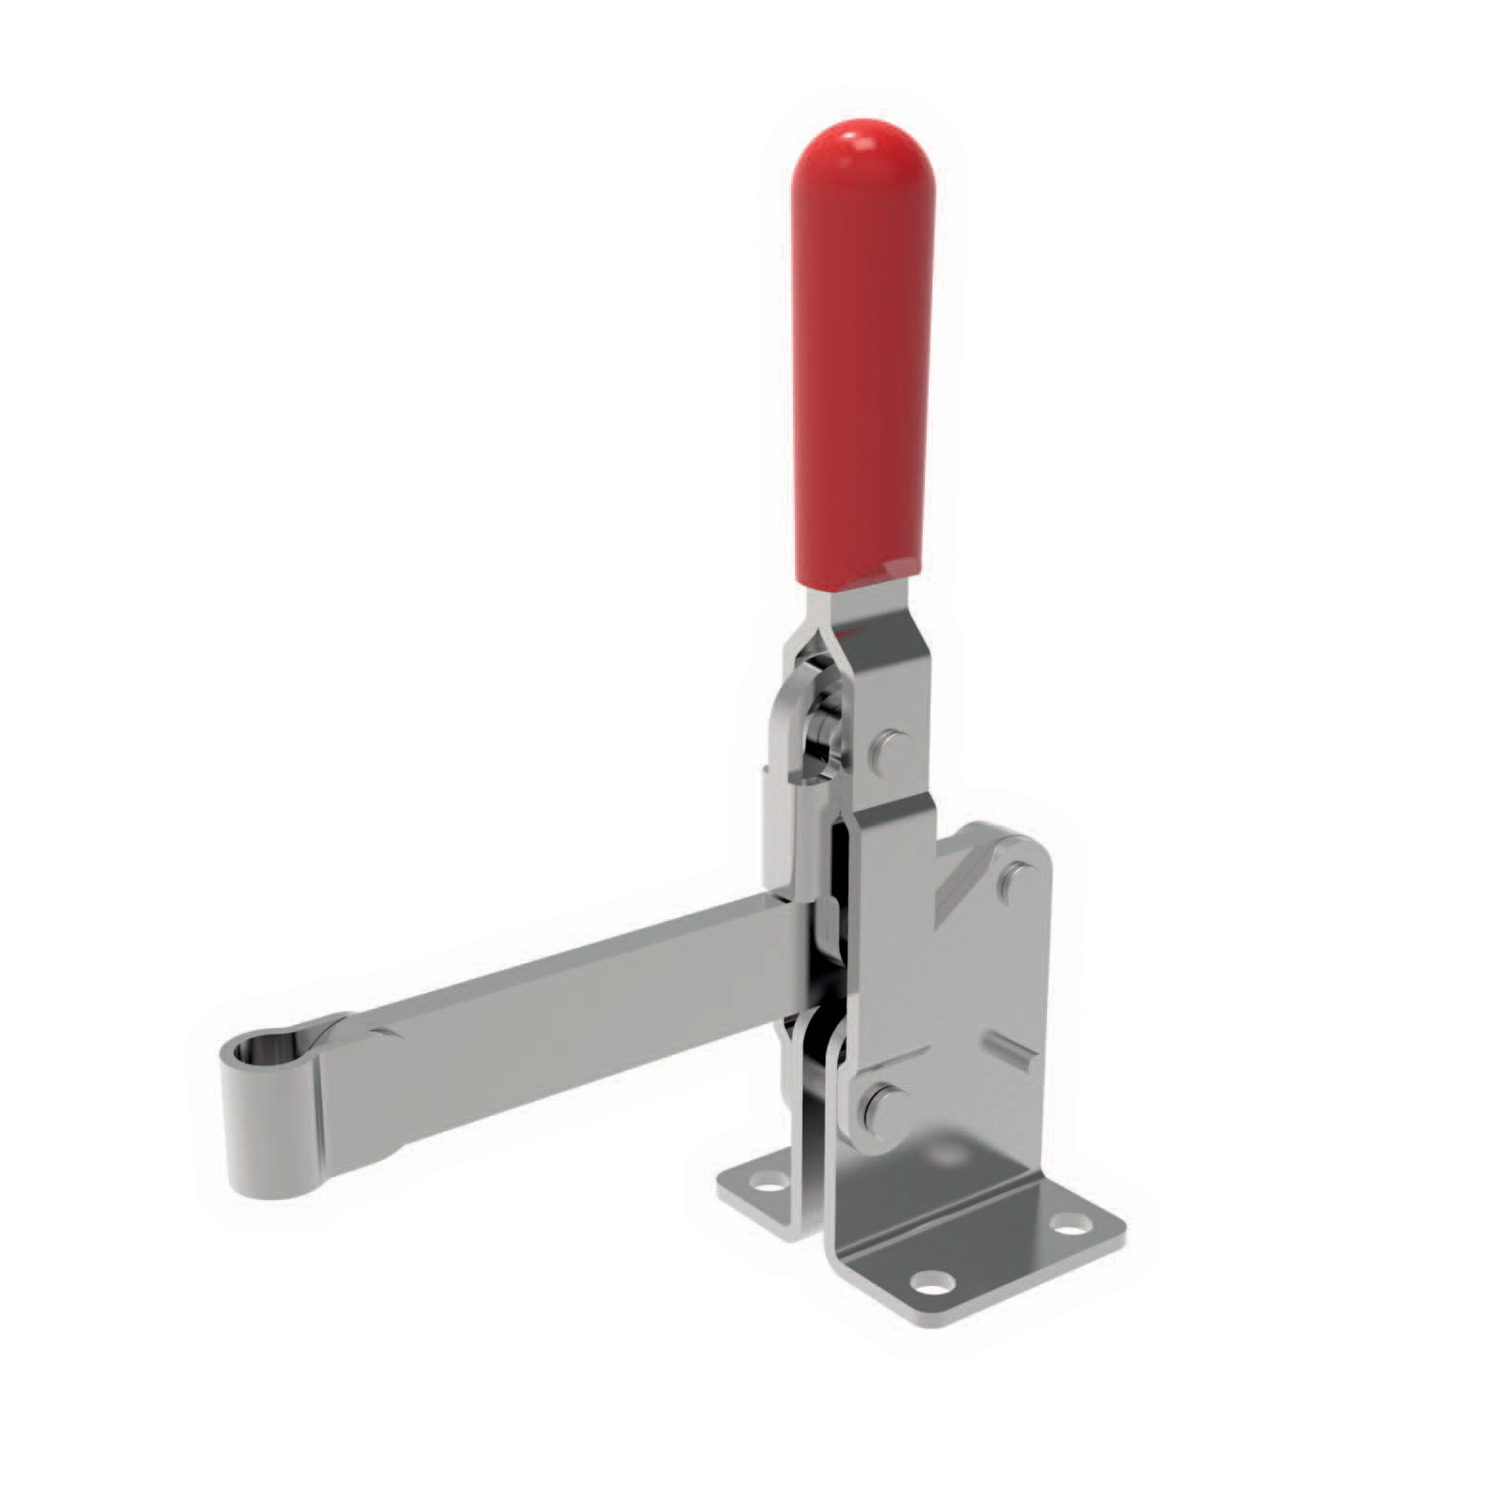 Toggle Clamps - Vertical Acting Economy vertical acting toggle clamps are available in various sizes and are supplied complete with clamping screw along with a rubber nose.